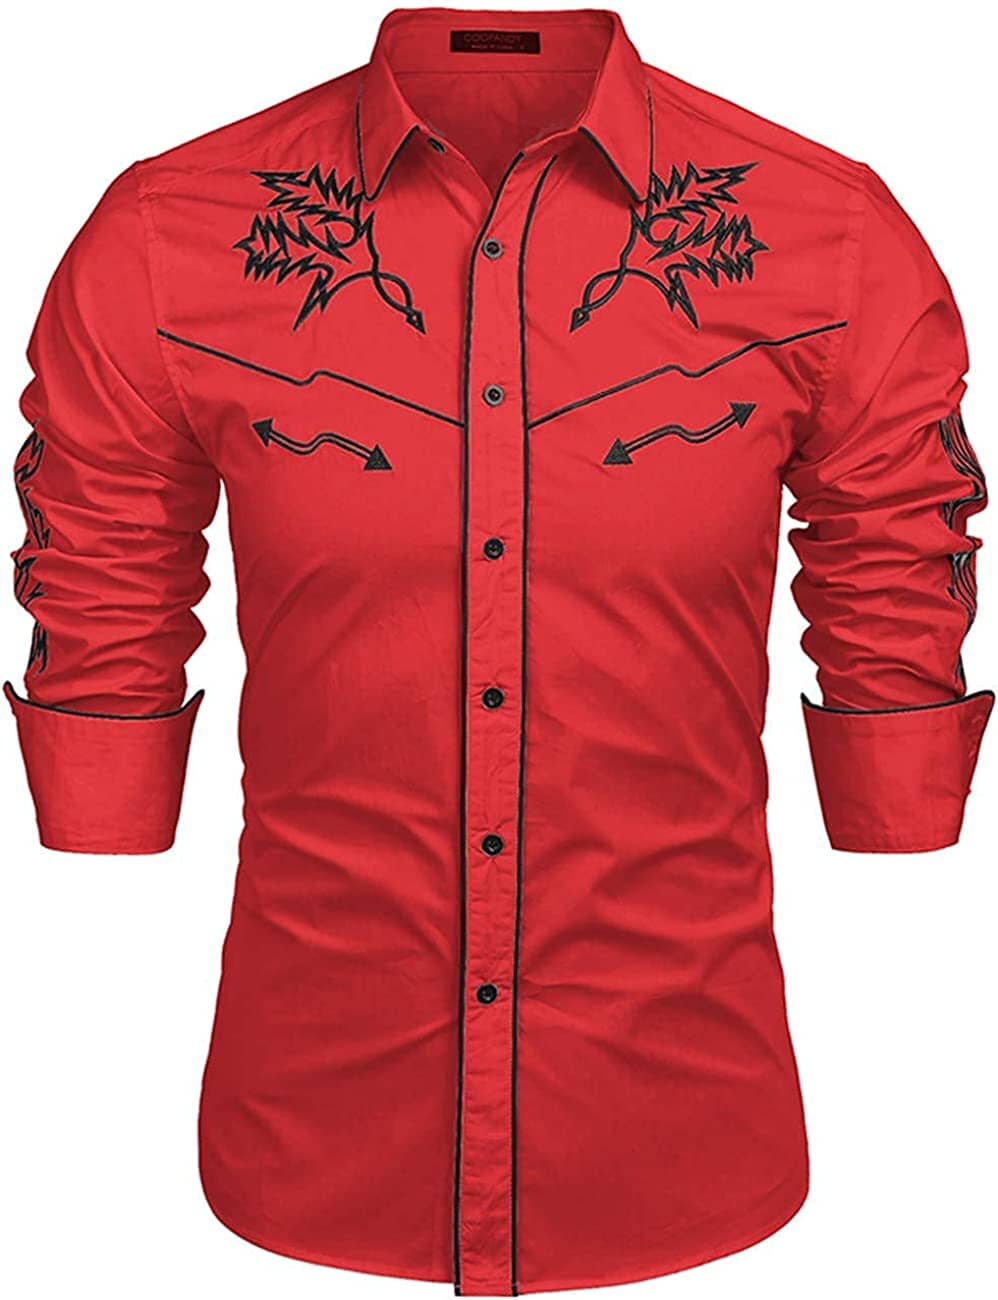 Western Cowboy Embroidered Button Down Cotton Shirt (US Only) Shirts COOFANDY Store Red S 